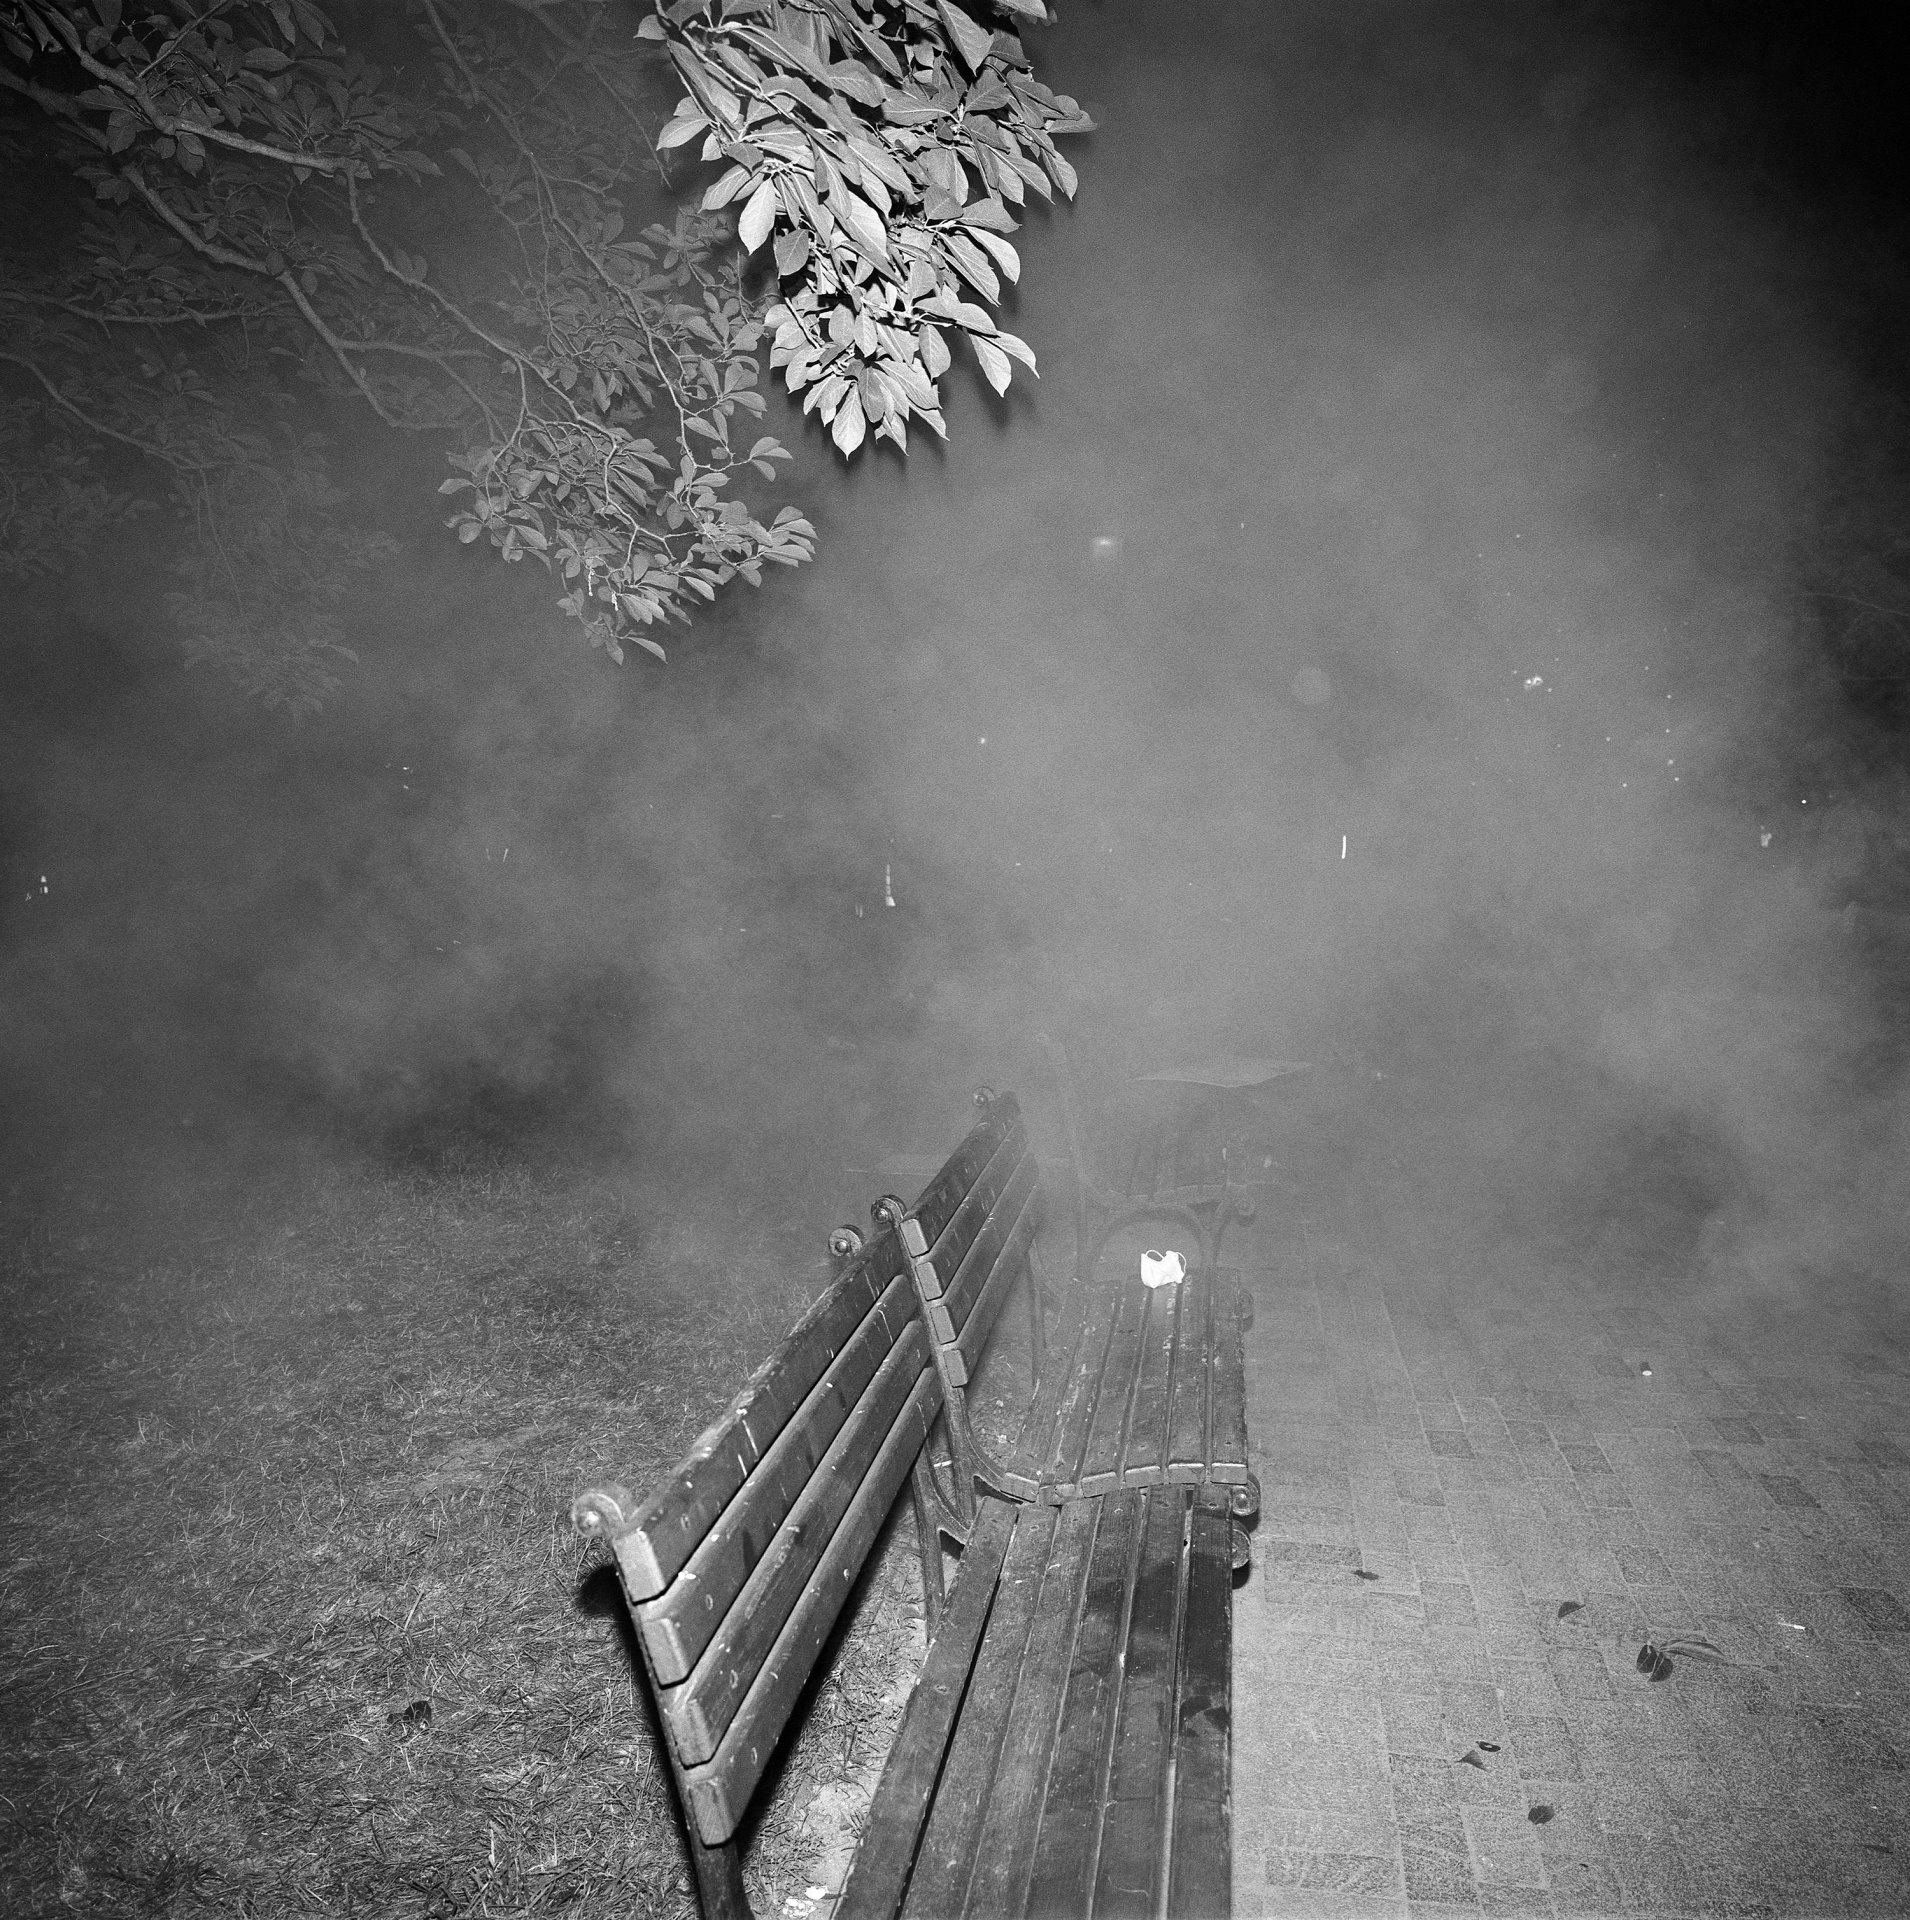 Tear gas fired by police surrounds a bench in Lafayette Park not far from the White House during the second night of protests related to the murder of George Floyd, a Black man who was killed by a police officer in Minneapolis. The security situation in Lafayette Park led to the White House bringing in several units of the National Guard including additional police and security forces from the federal government.